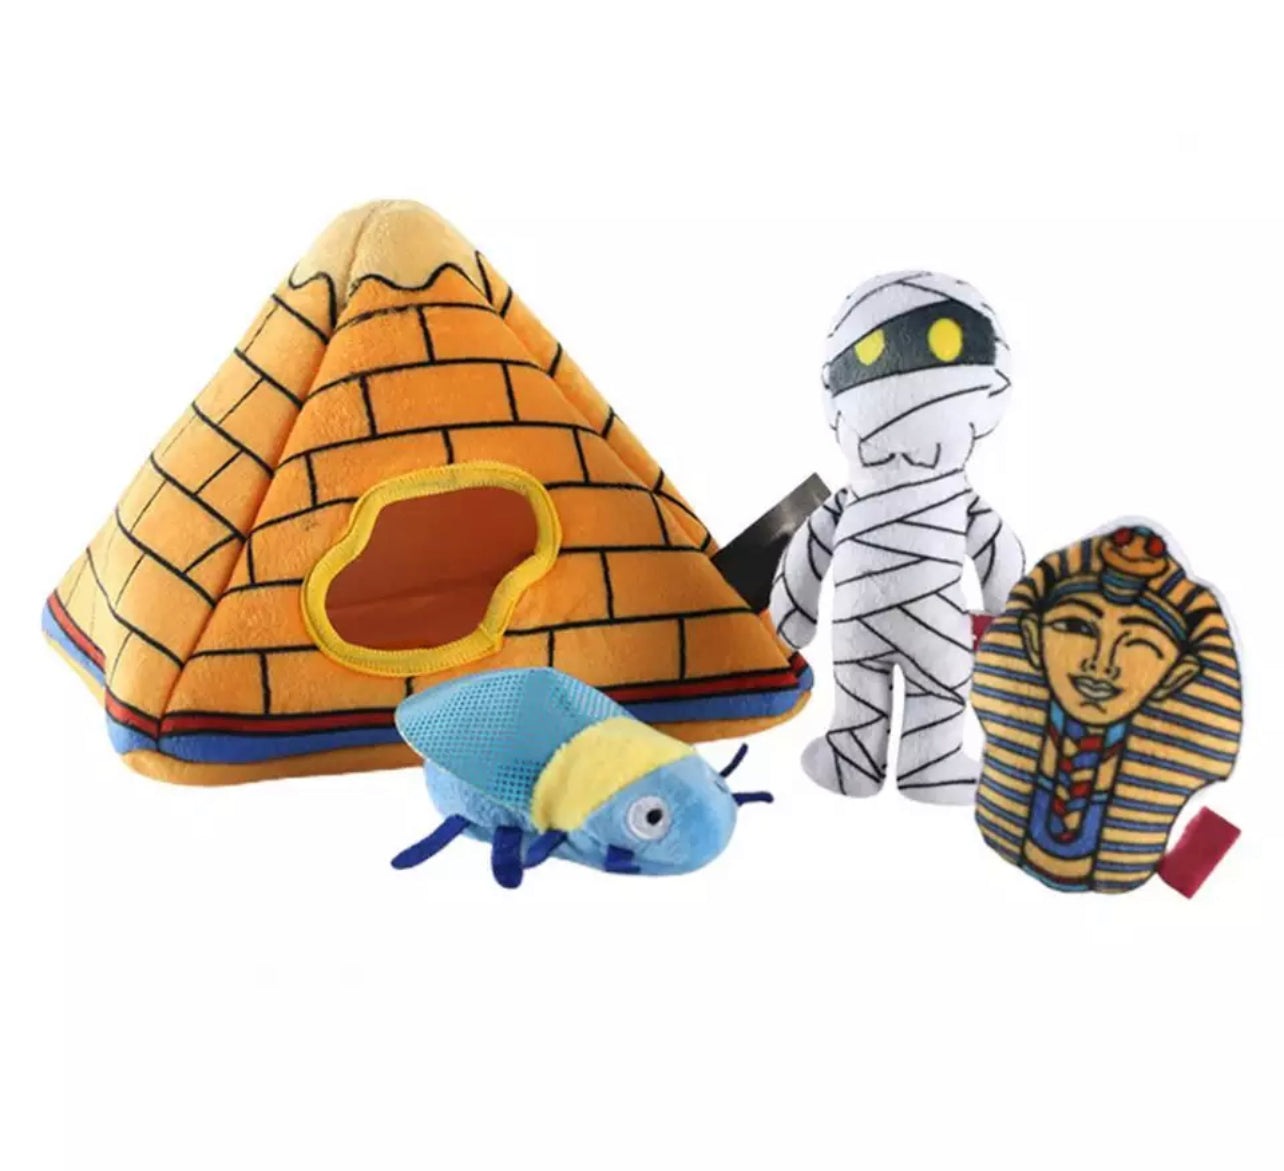 Hide and Seek Egyptian Pyramid Interactive Toy